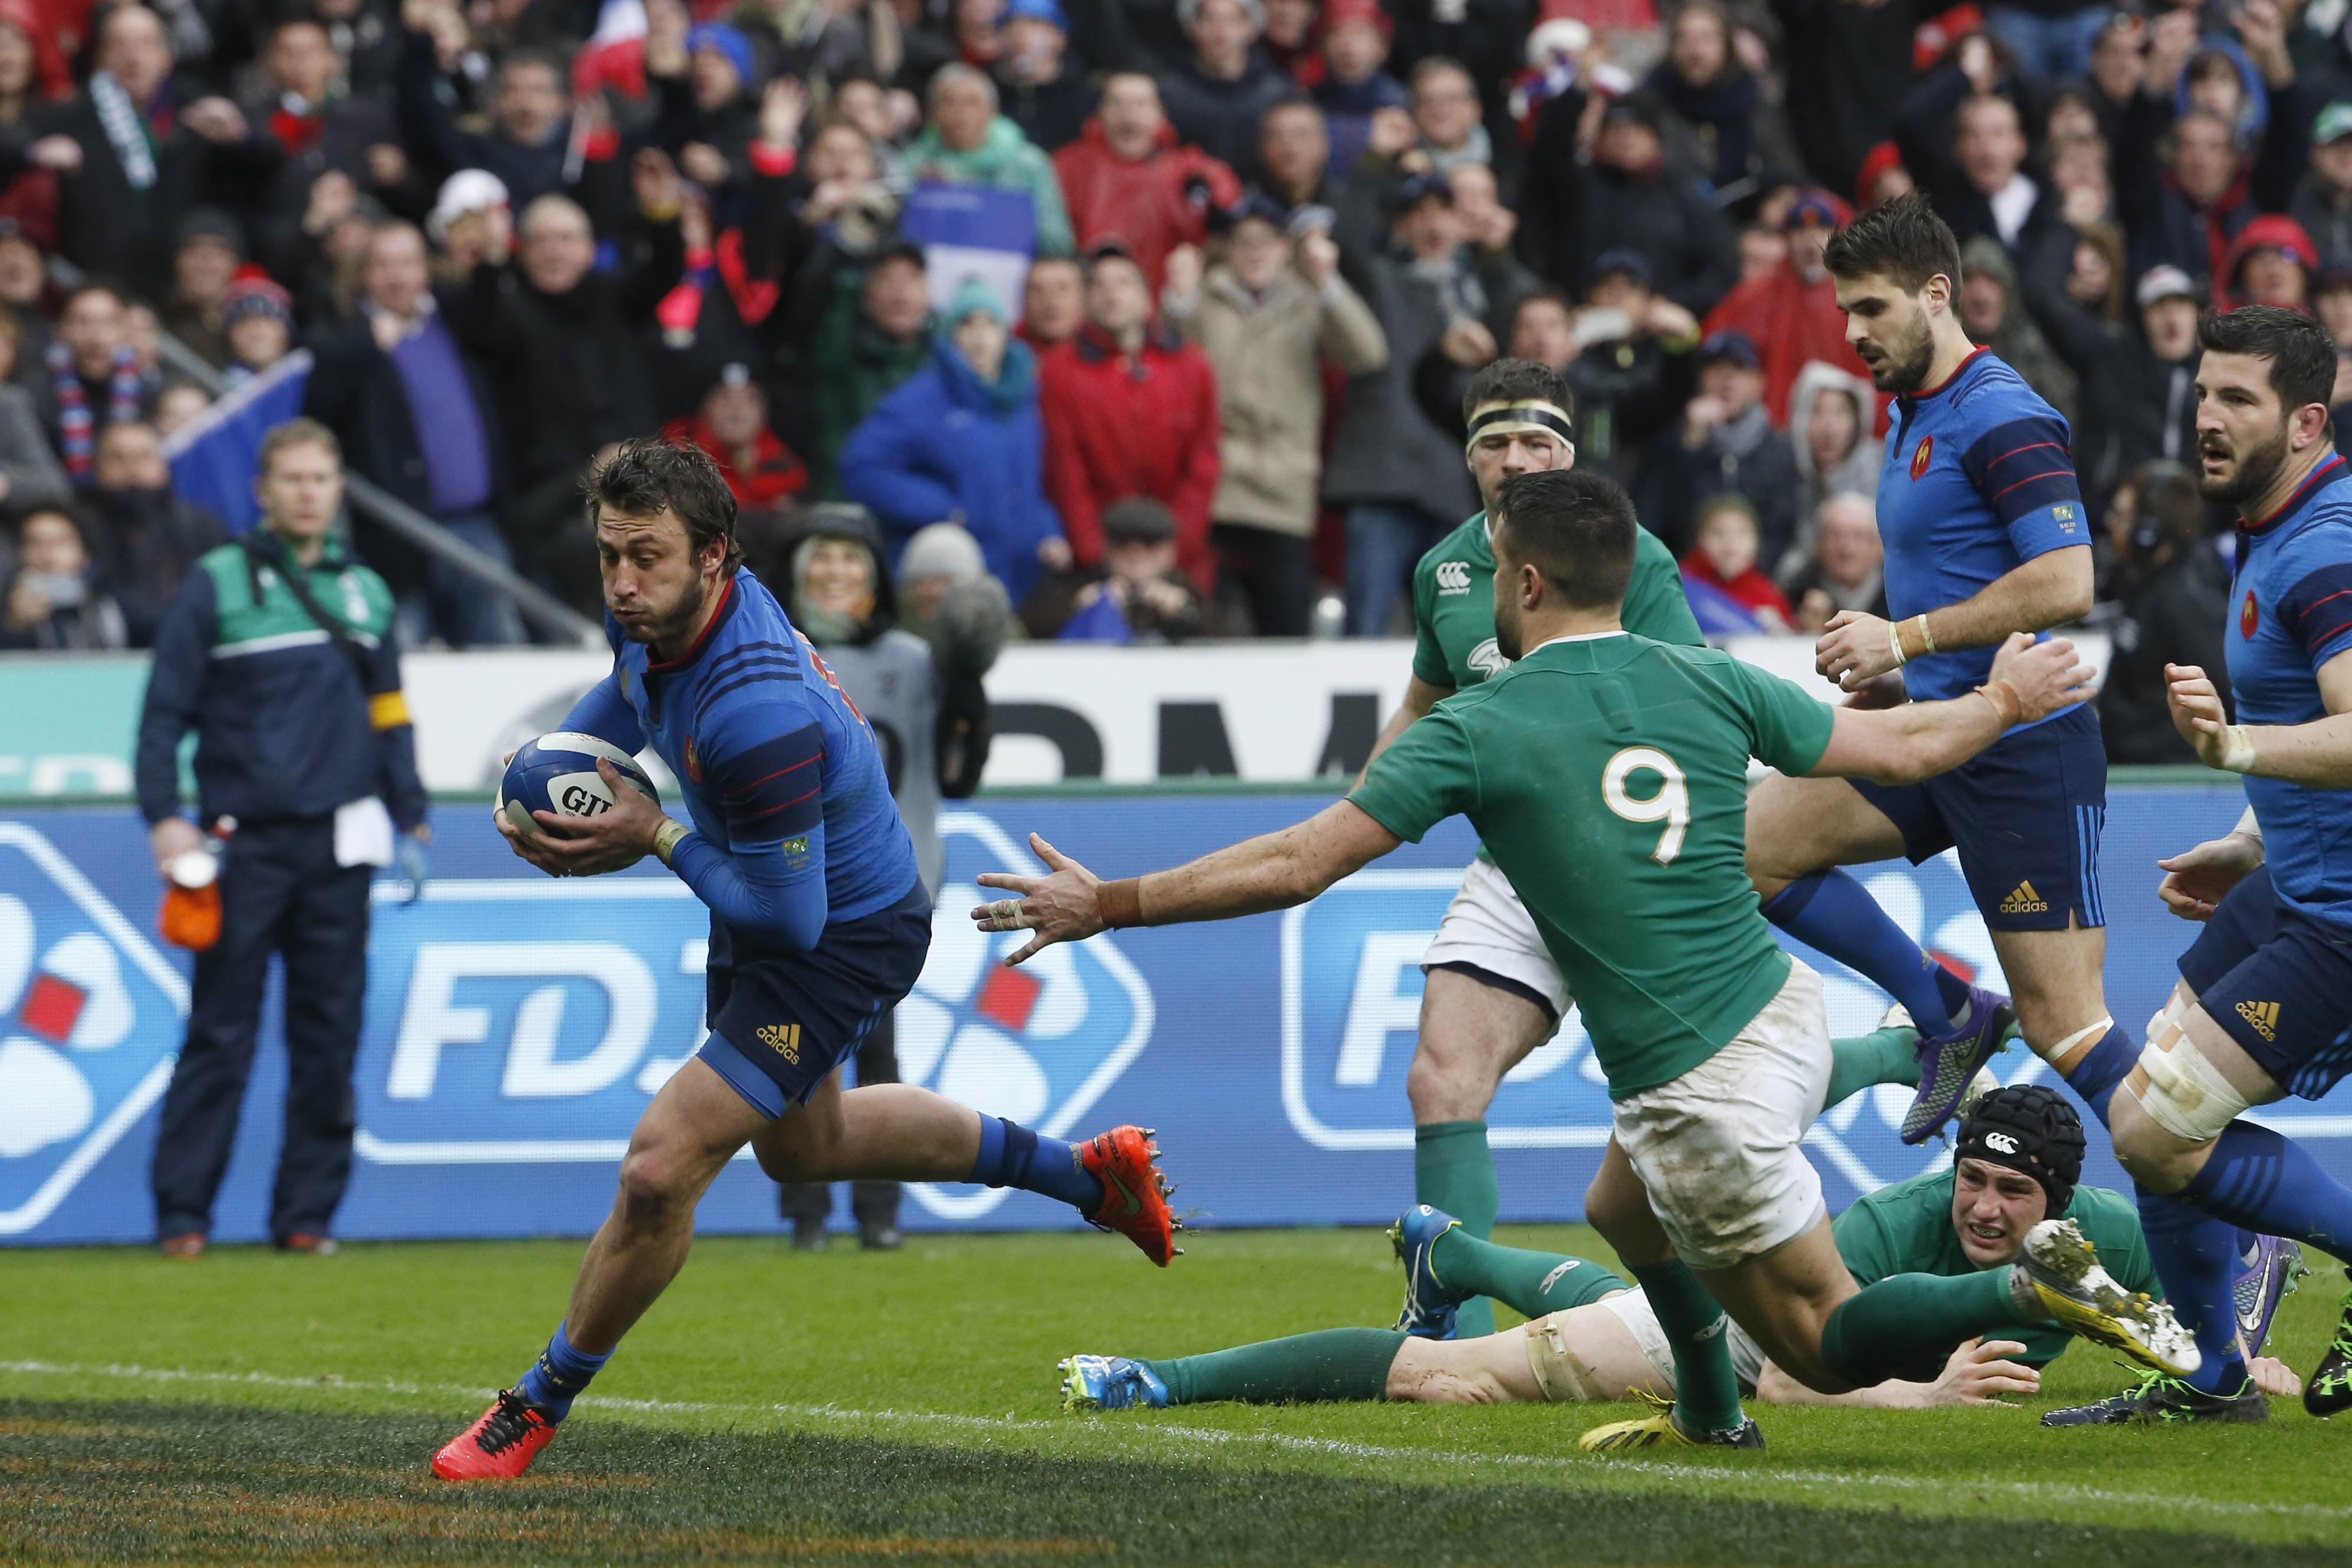 France fullback Maxime Medard on his way to scoring the winning try in their Six Nations 10-9 victory over Ireland in Paris. Photo: AFP